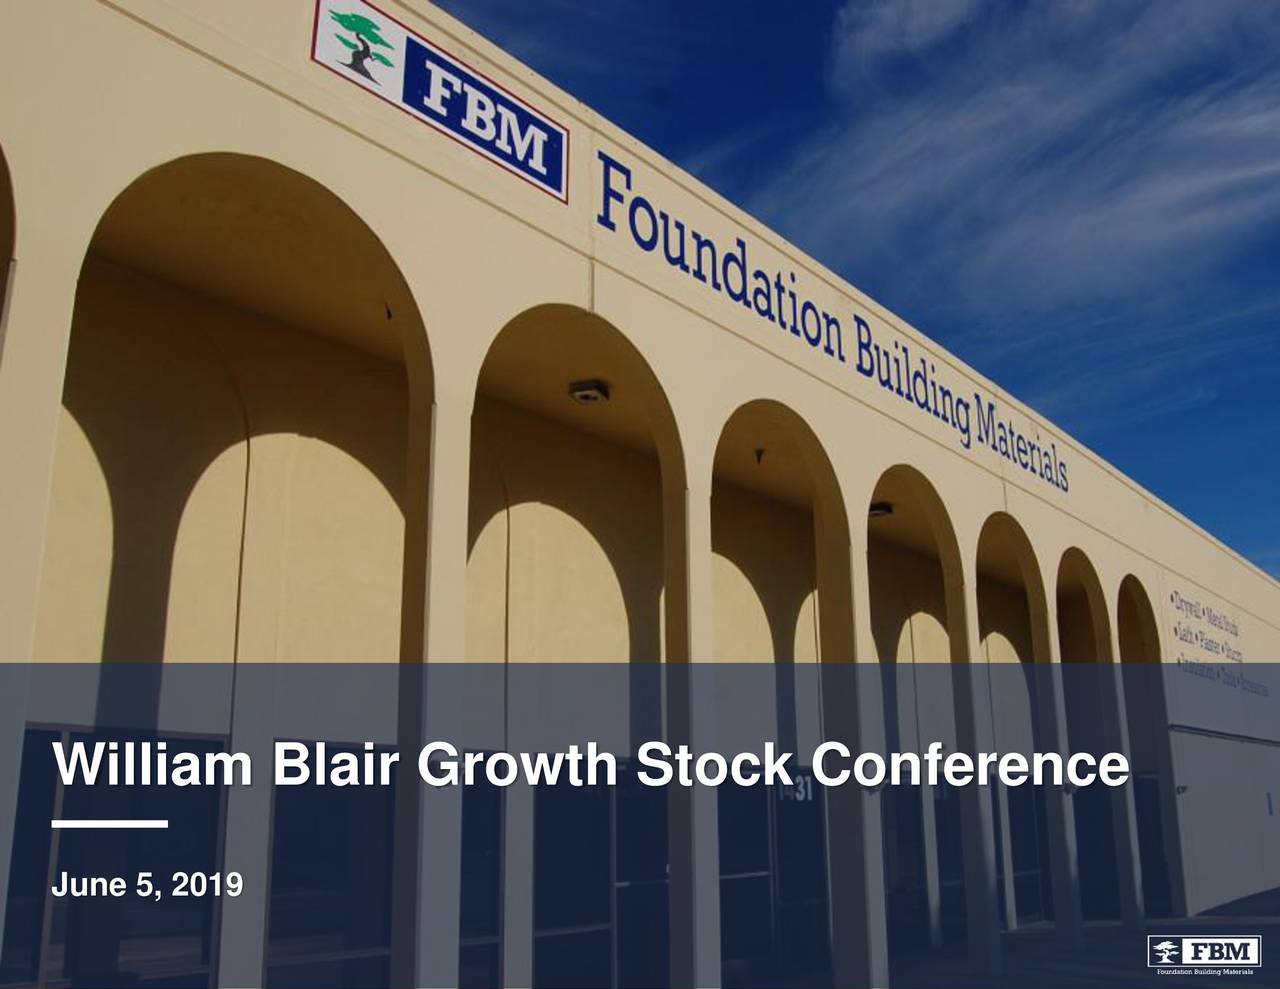 Foundation Building Materials (FBM) Presents At William Blair Growth